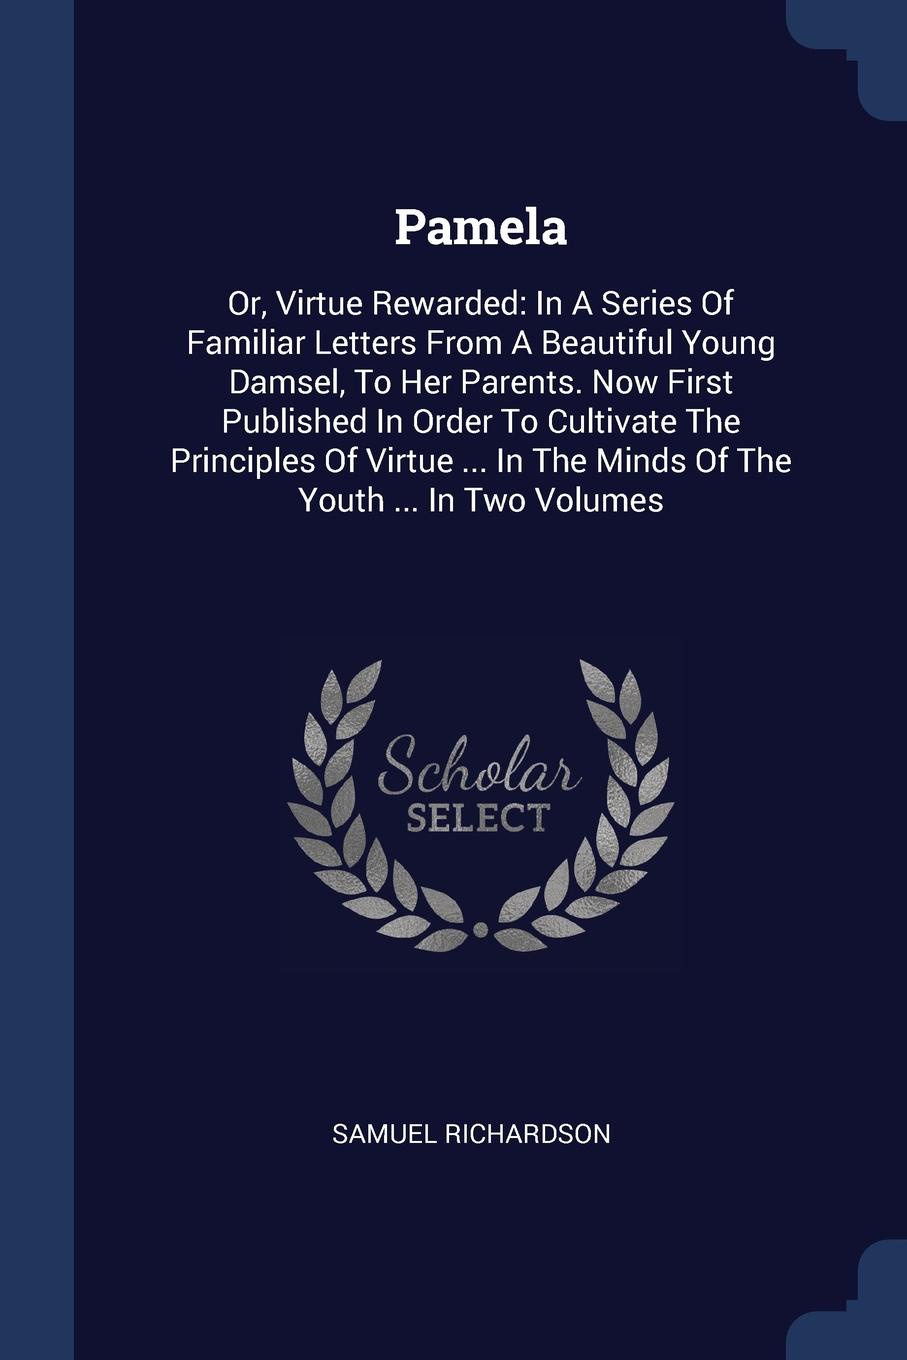 Pamela. Or, Virtue Rewarded: In A Series Of Familiar Letters From A Beautiful Young Damsel, To Her Parents. Now First Published In Order To Cultivate The Principles Of Virtue ... In The Minds Of The Youth ... In Two Volumes